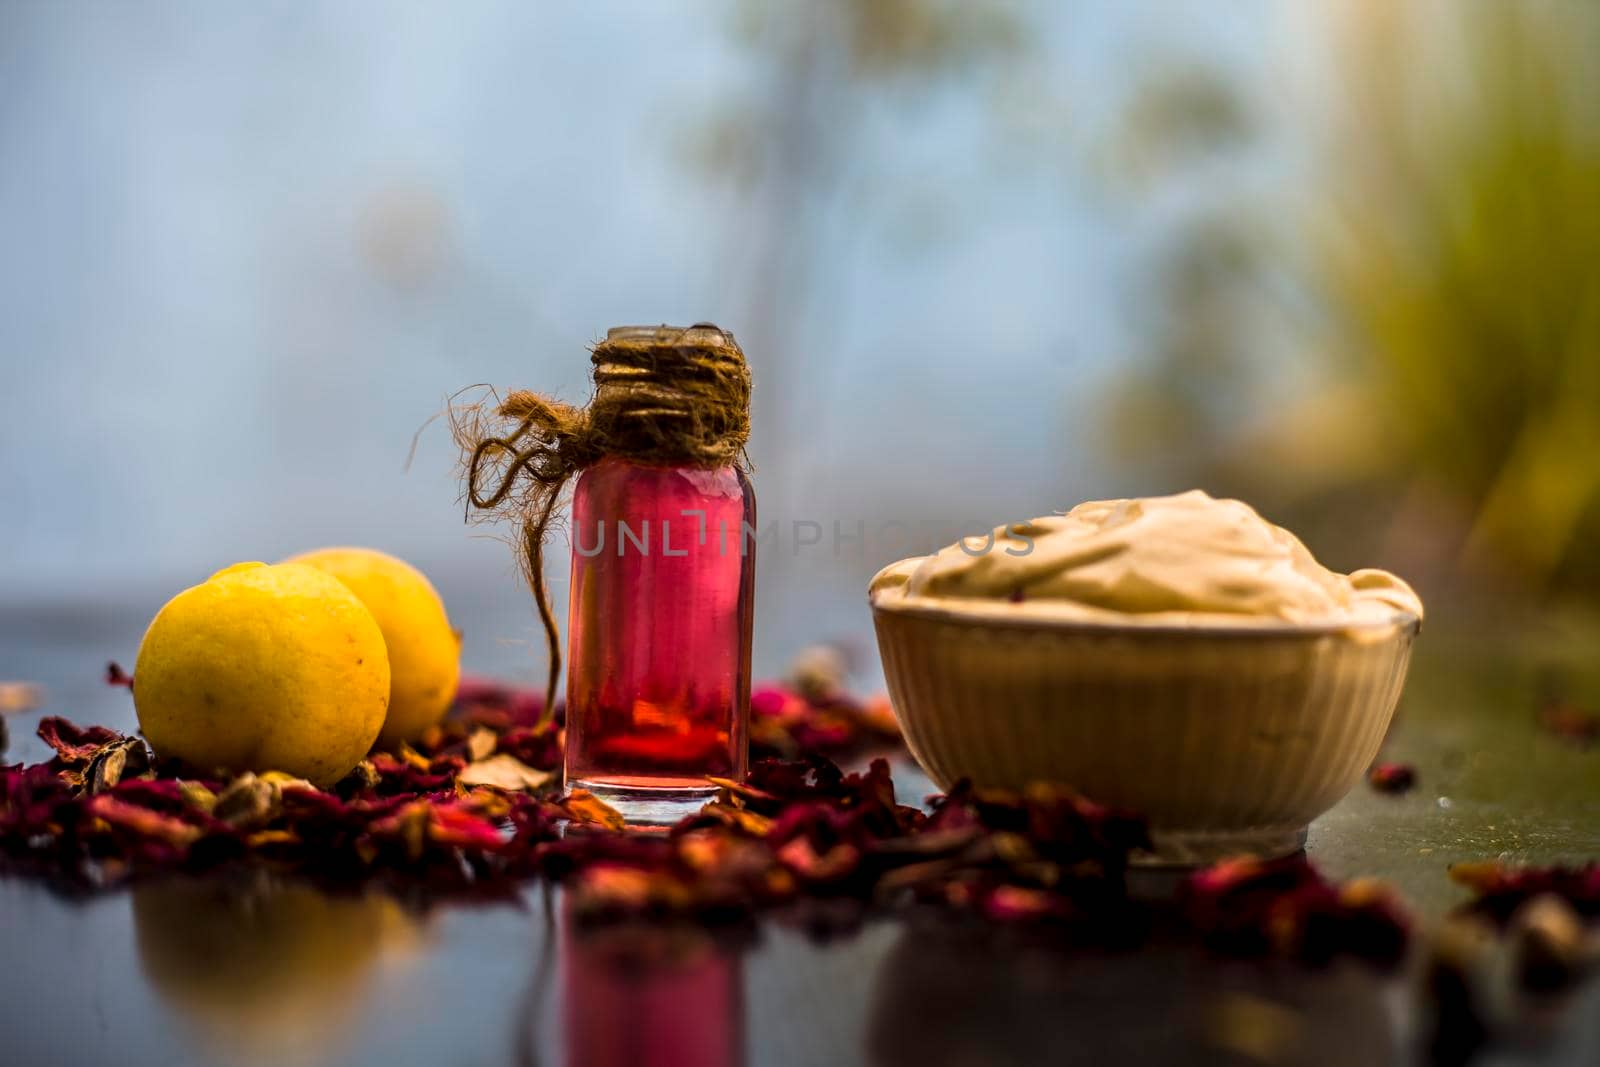 Best cheap DIY face mask for acne scars of multani mitti or fuller's earth or mulpani mitti on the wooden surface consisting of lemon juice, fuller's earth, and some rose water also.